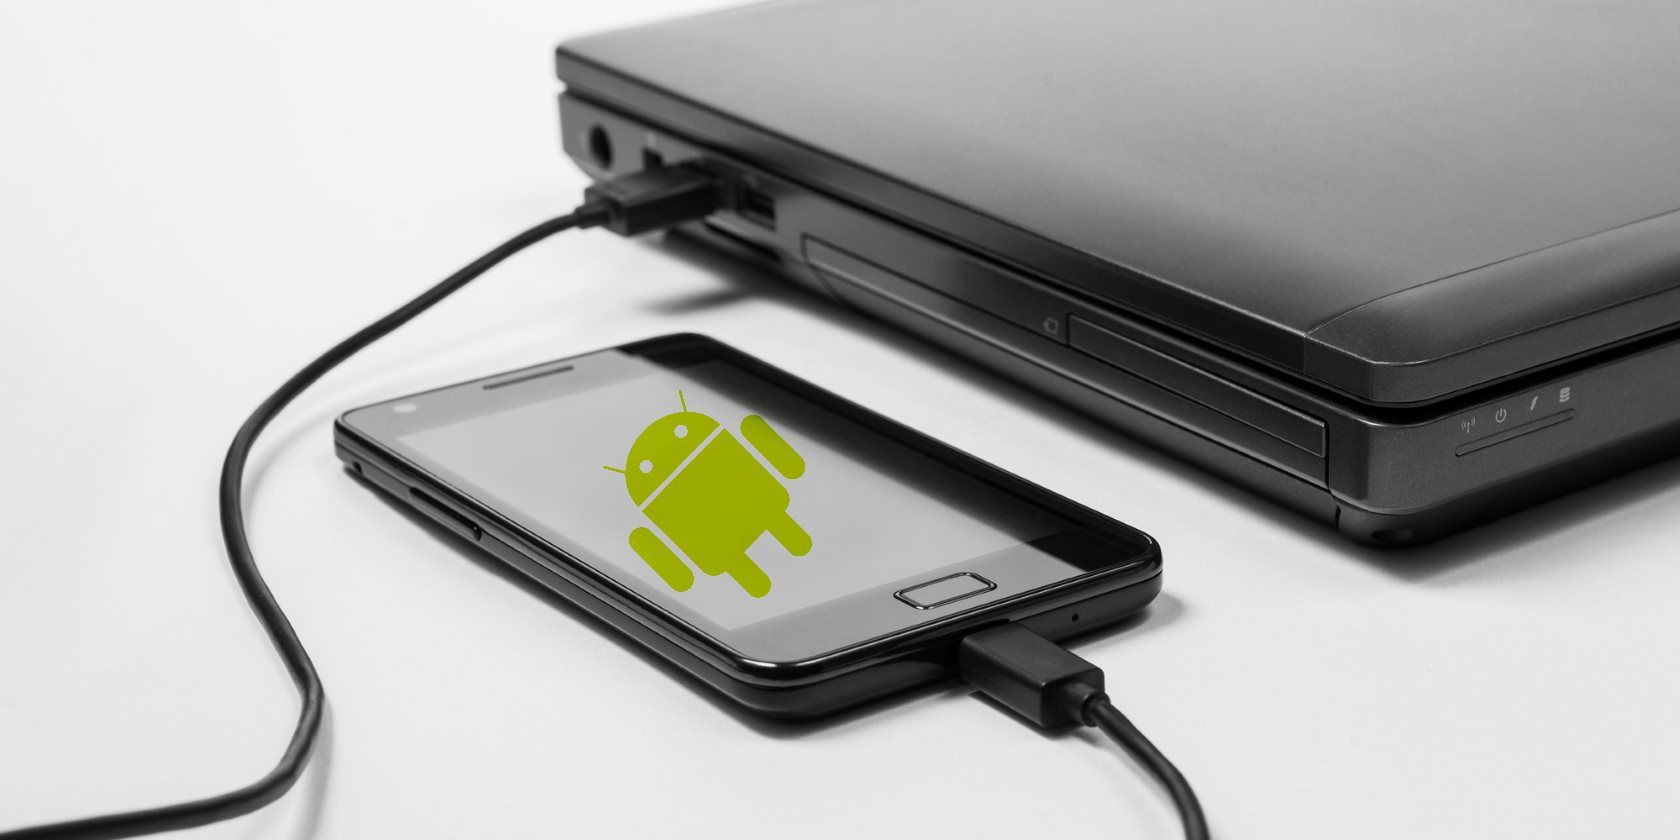 What Is USB Debugging Mode on Android? Here's How to Enable It